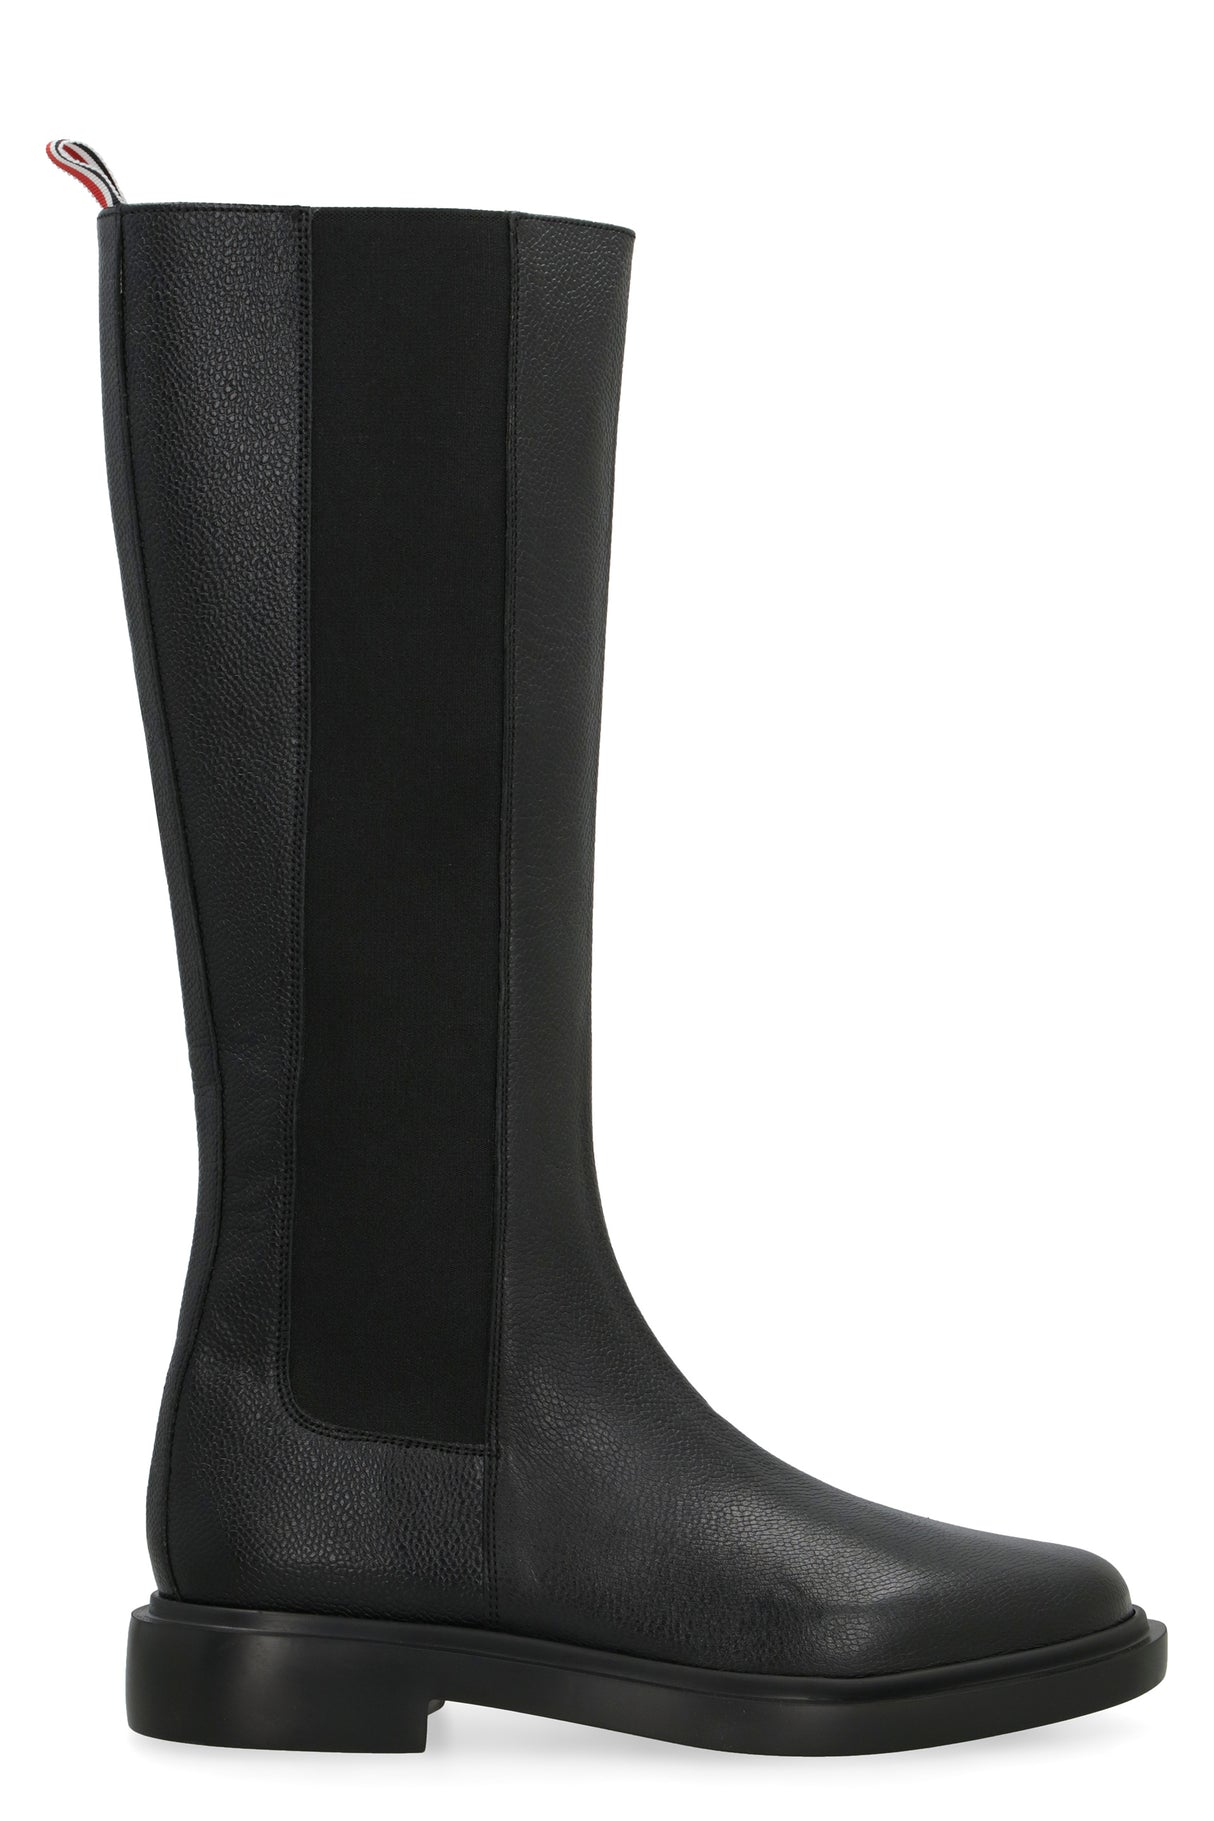 THOM BROWNE Black Leather Boots for Women - FW23 Collection